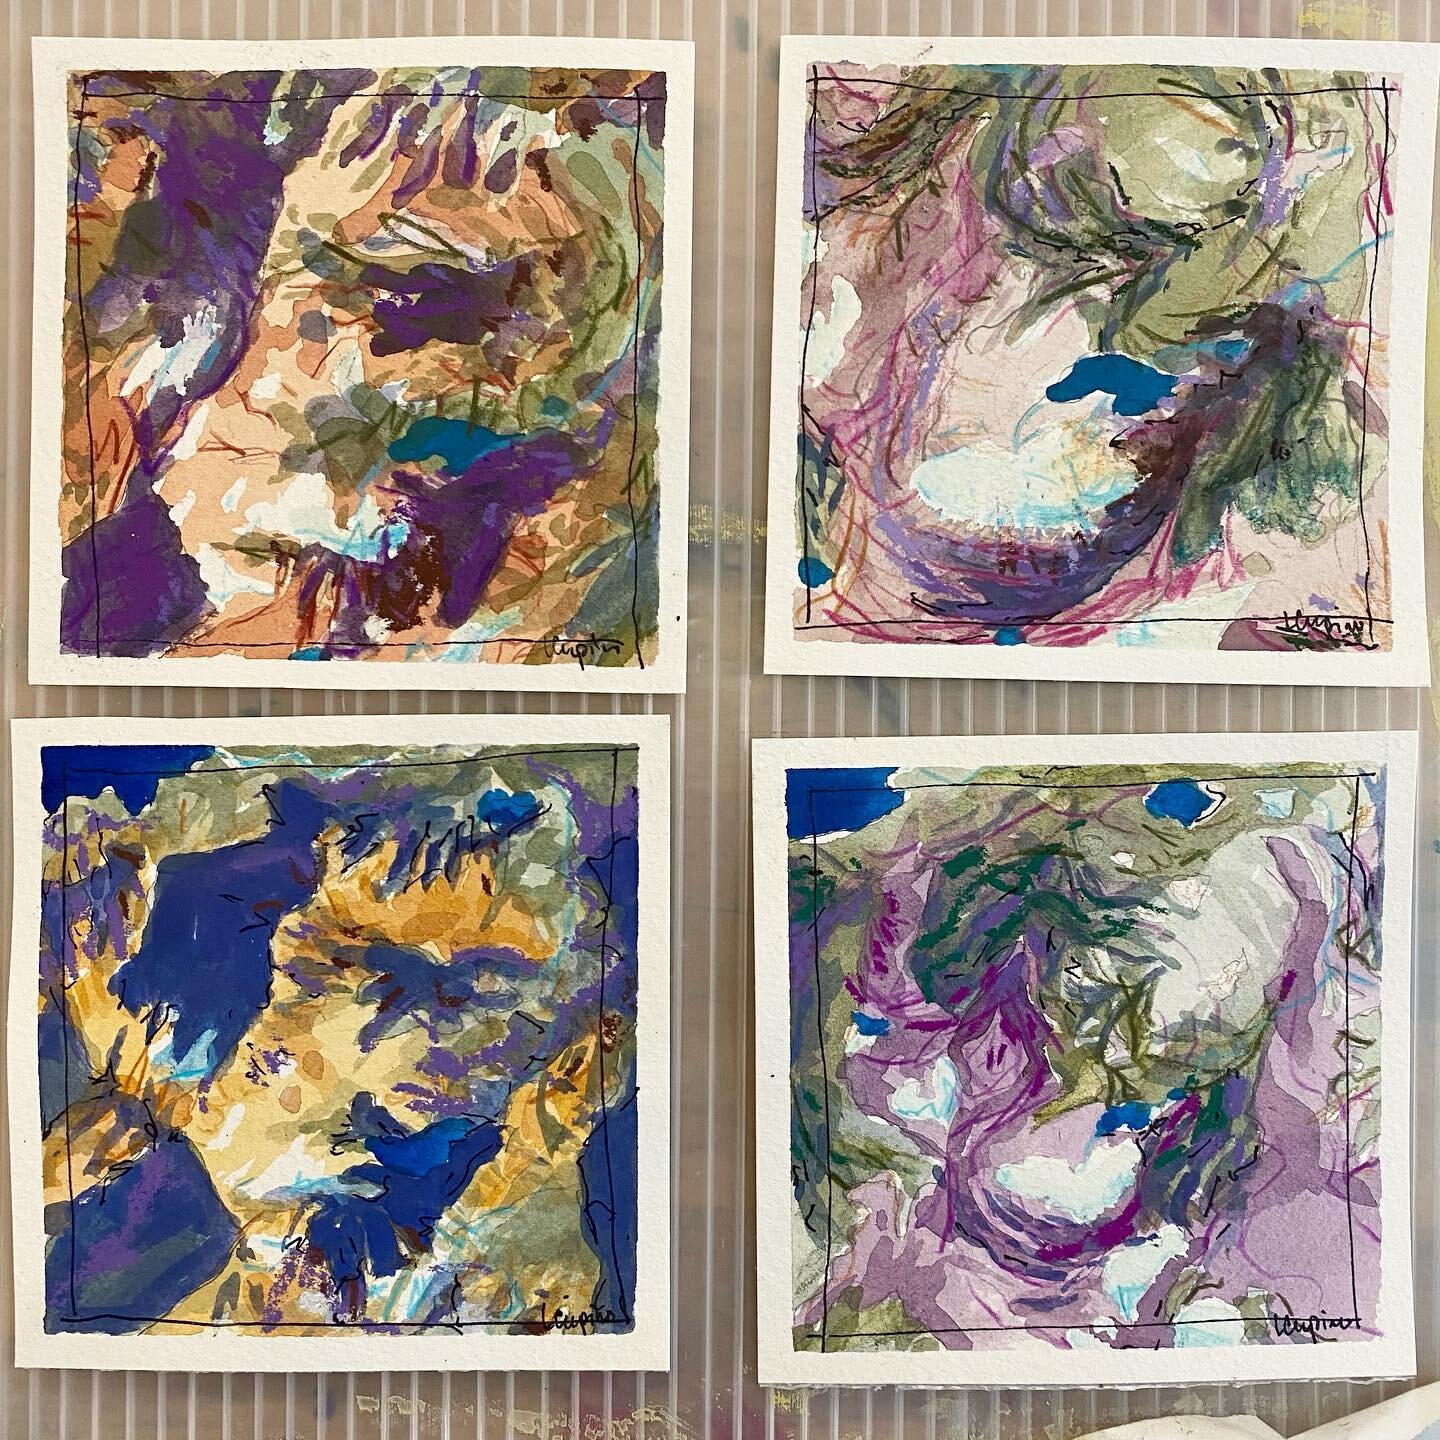 &lsquo;Harris Glacier, 1-4&rsquo; : so good together, but to be honest... individually, I&rsquo;m a little disappointed at my efforts to paint four versions at once. I tried too hard to link them. Each should have had more consideration as a single u